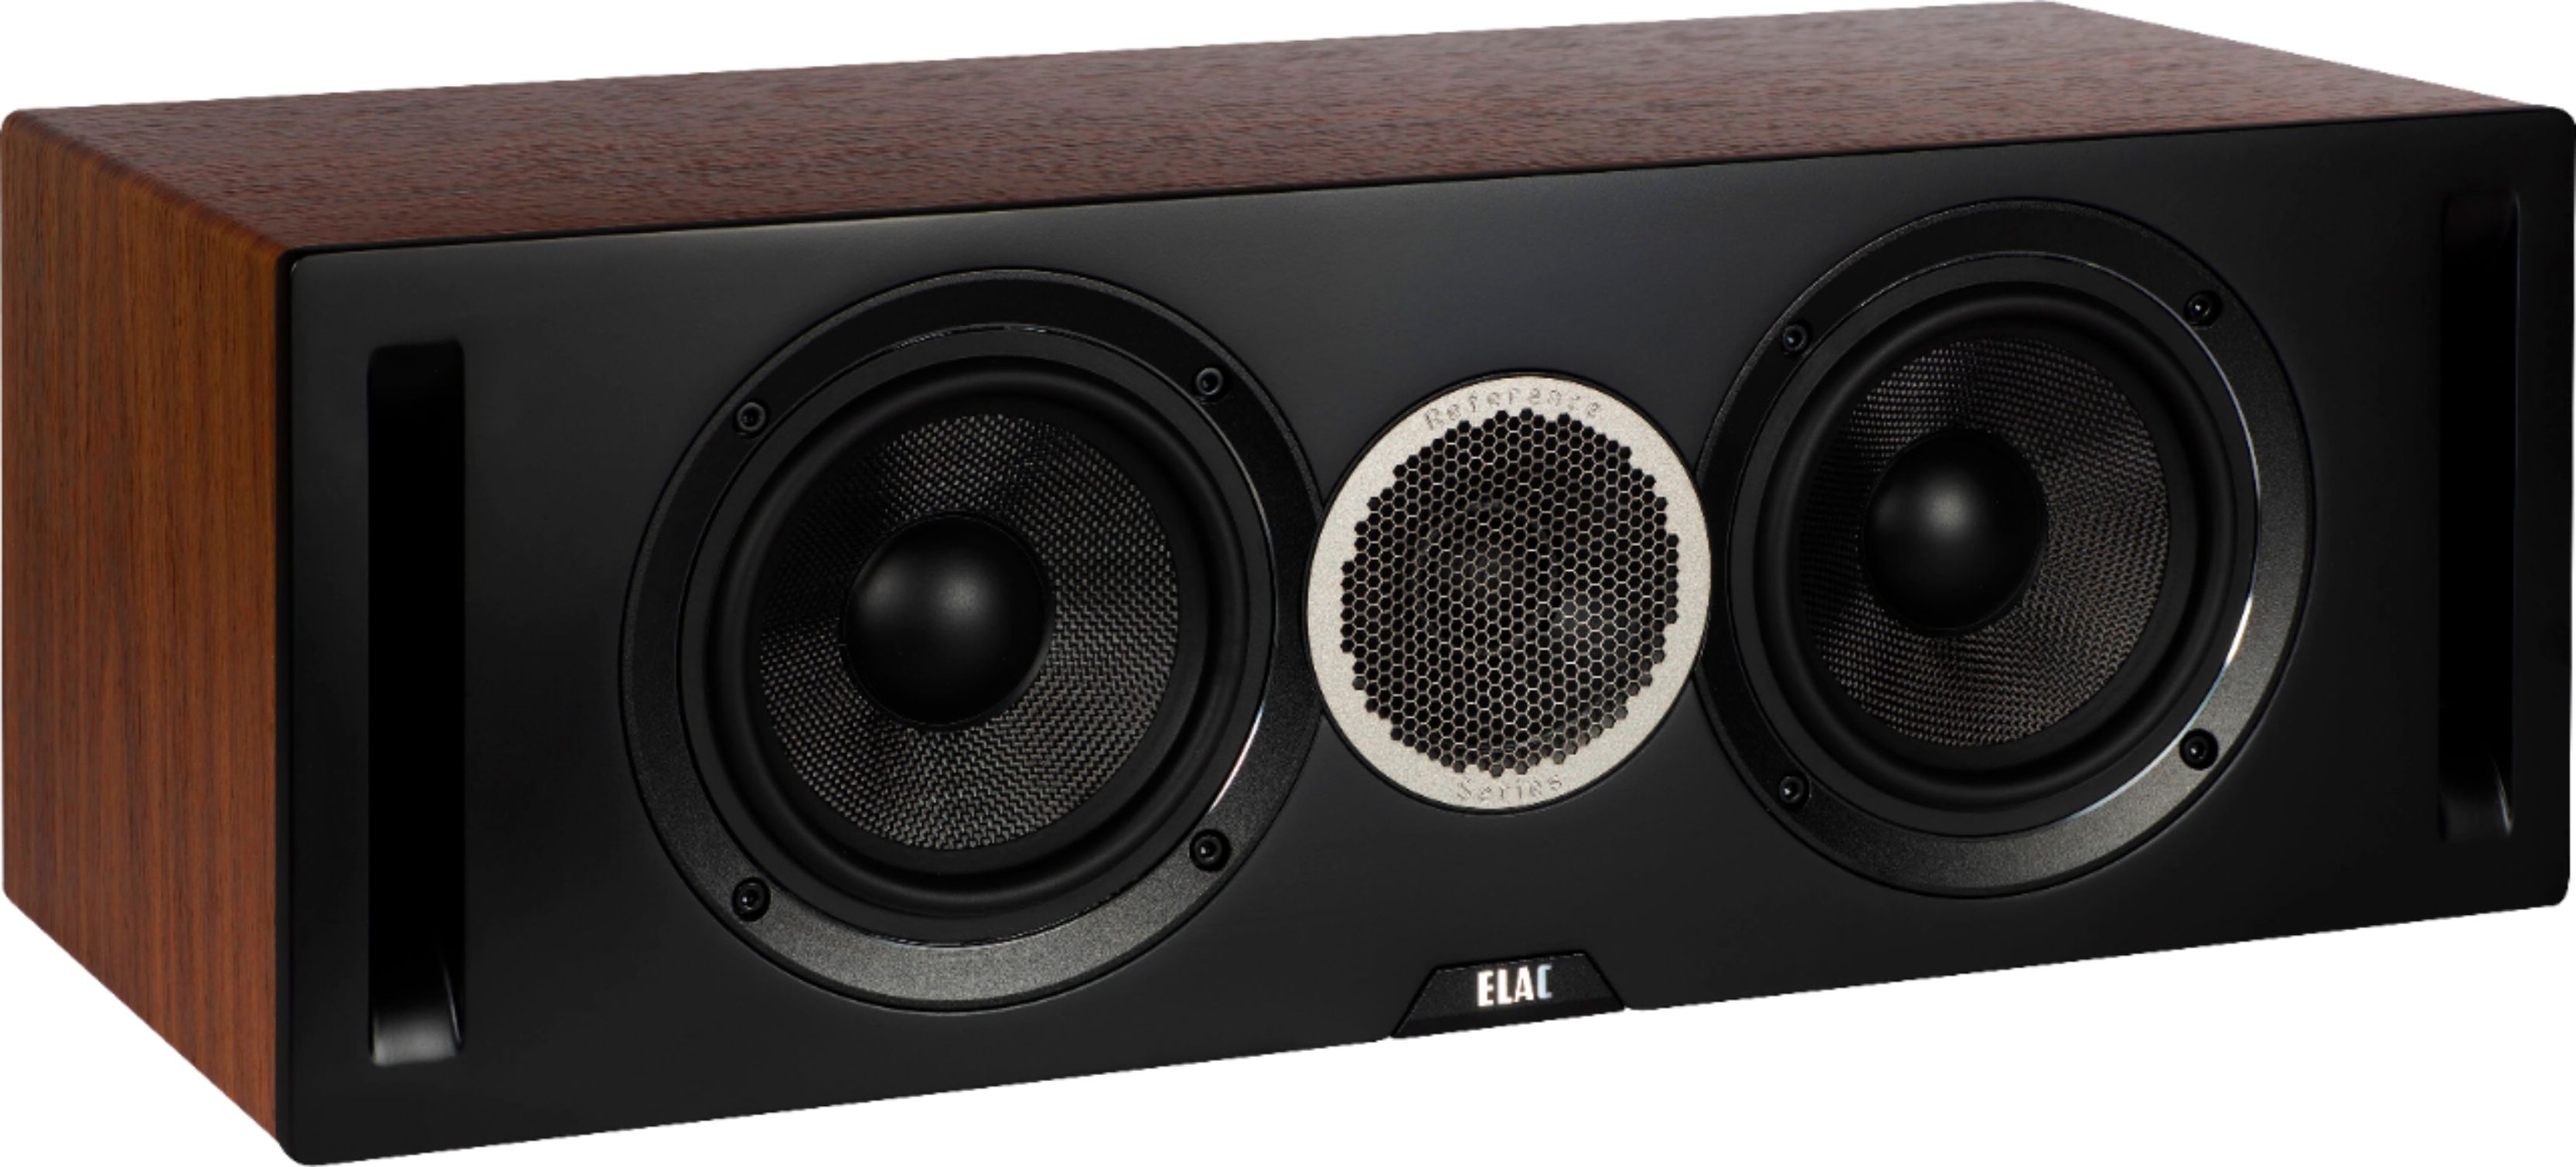 Angle View: ELAC - Debut Reference Center Speaker - Black/Walnut